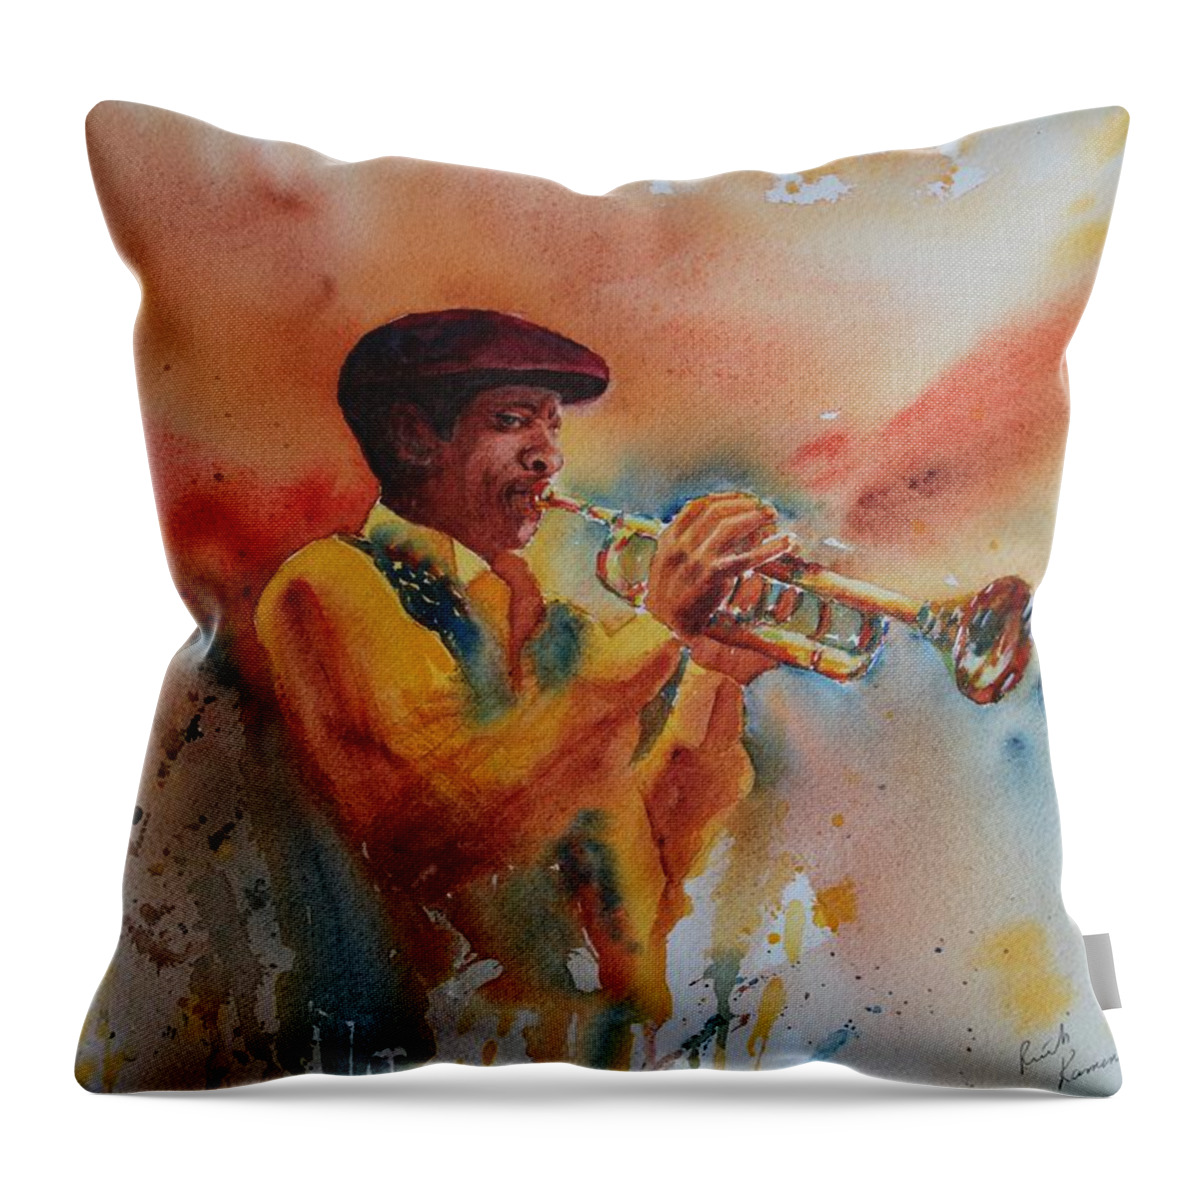 Music Throw Pillow featuring the painting Jazz Man by Ruth Kamenev